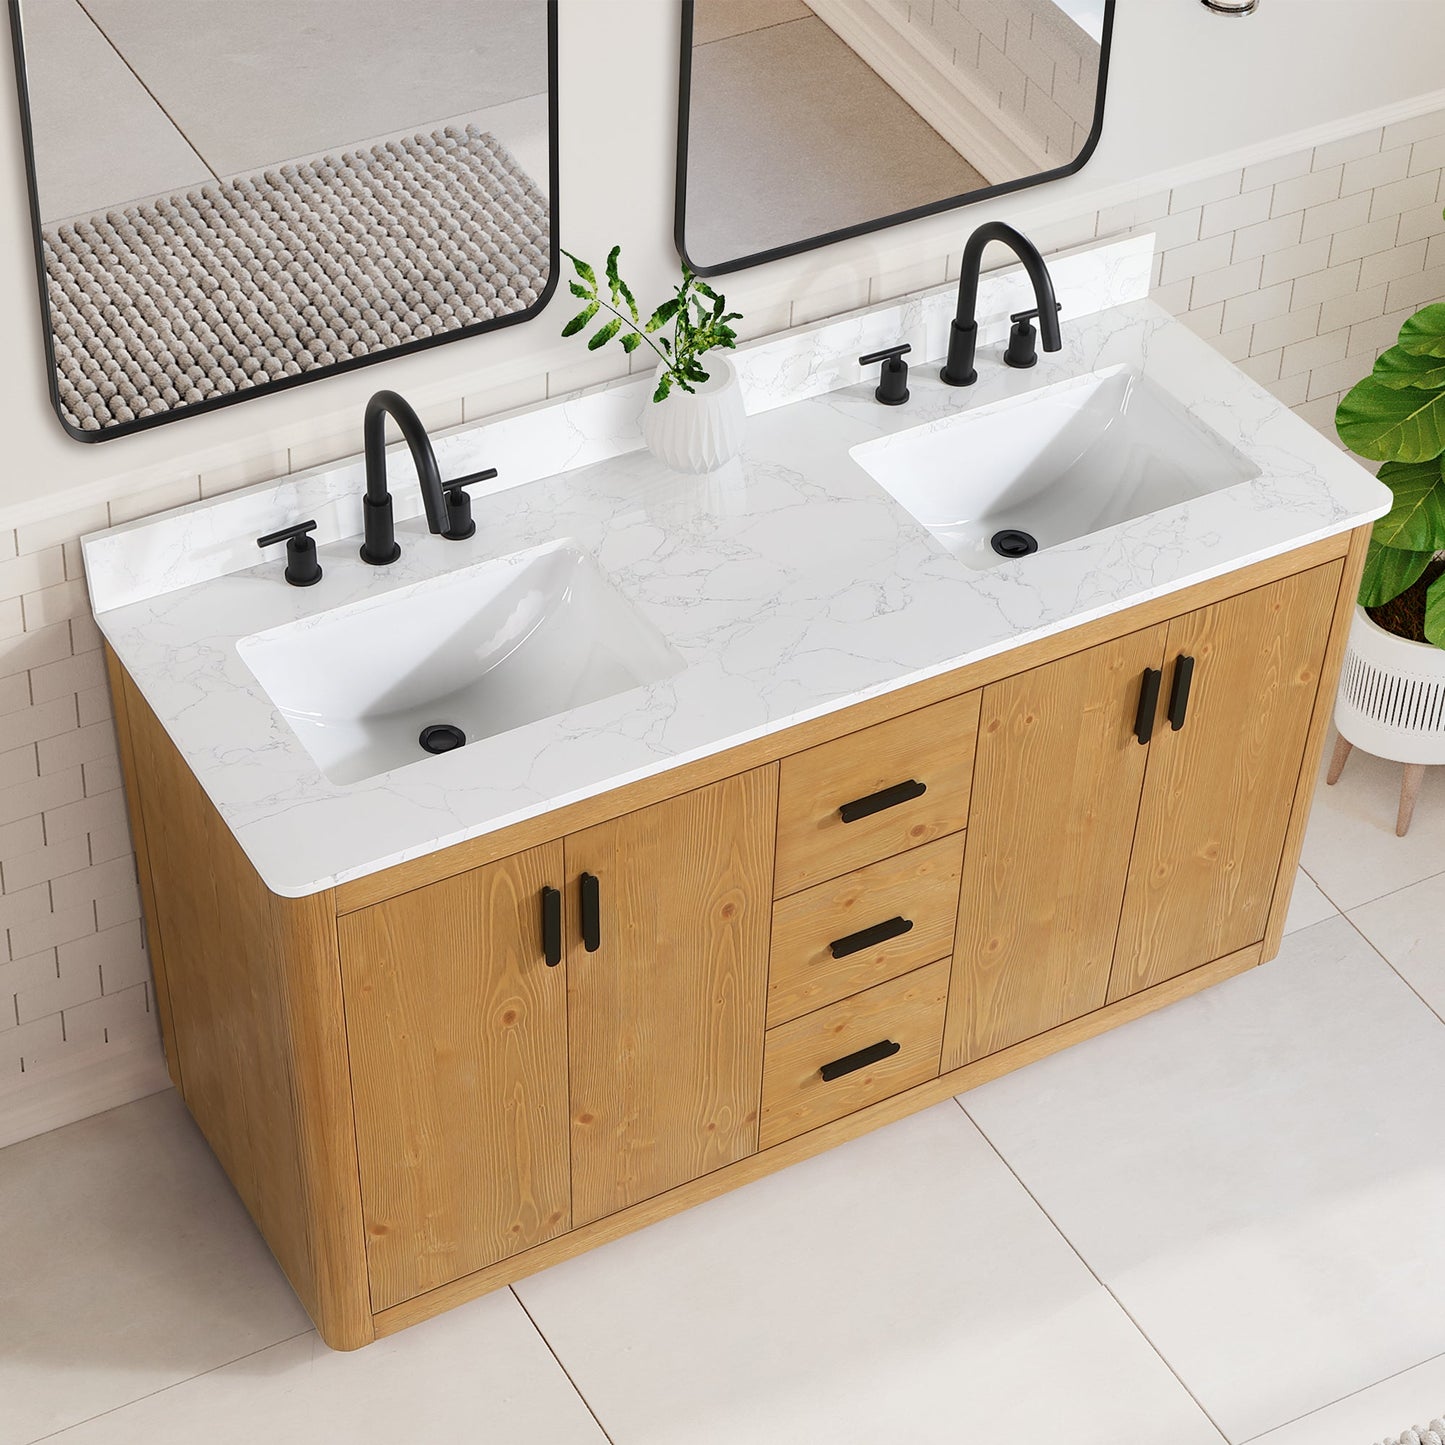 Perla 60" Double Bathroom Vanity in Natural Wood with Grain White Composite Stone Countertop without Mirror